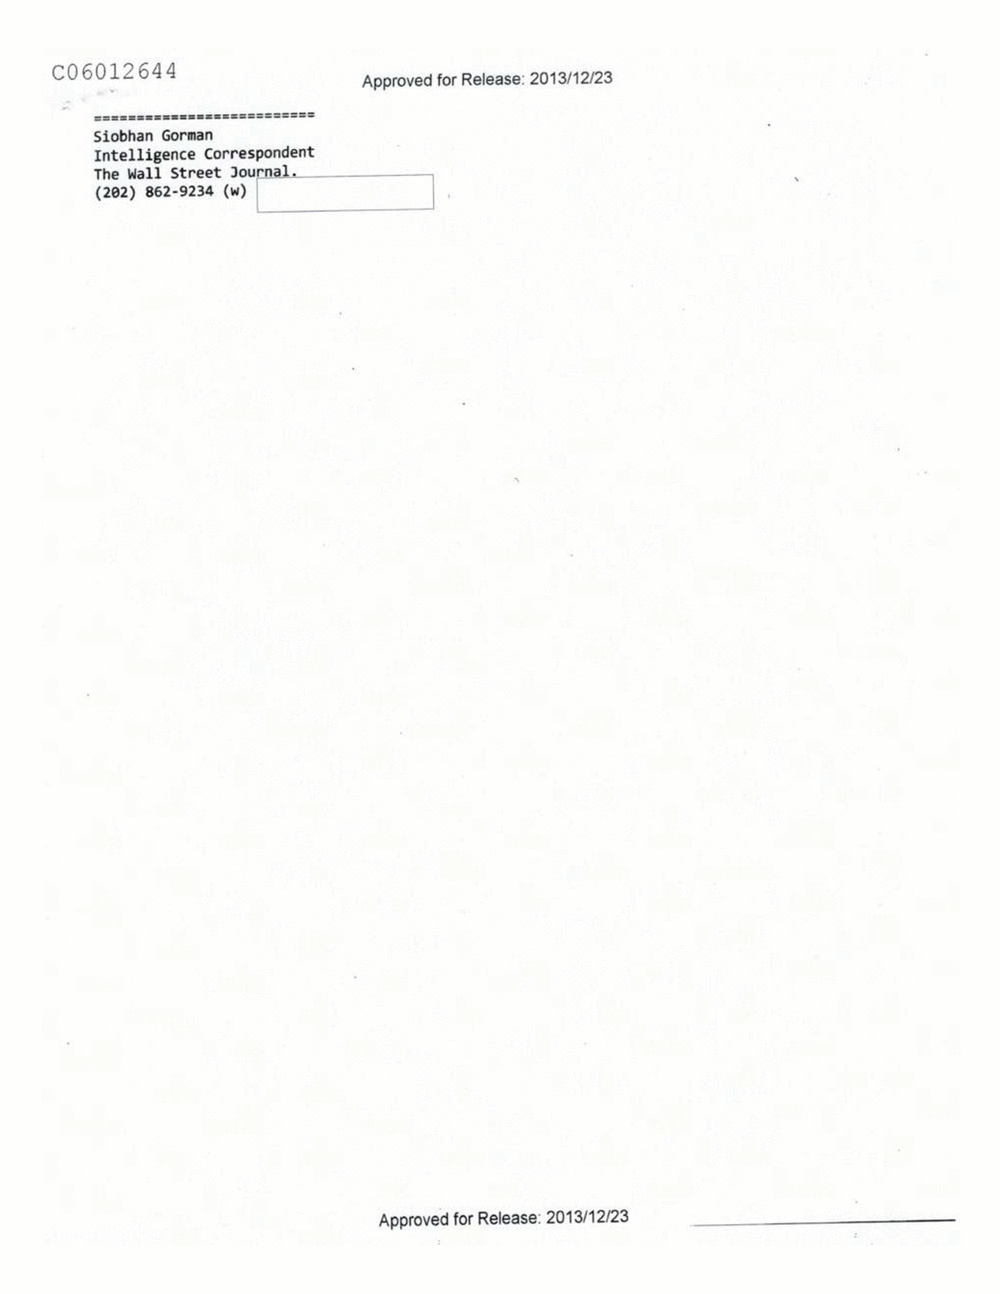 Page 213 from Email Correspondence Between Reporters and CIA Flacks